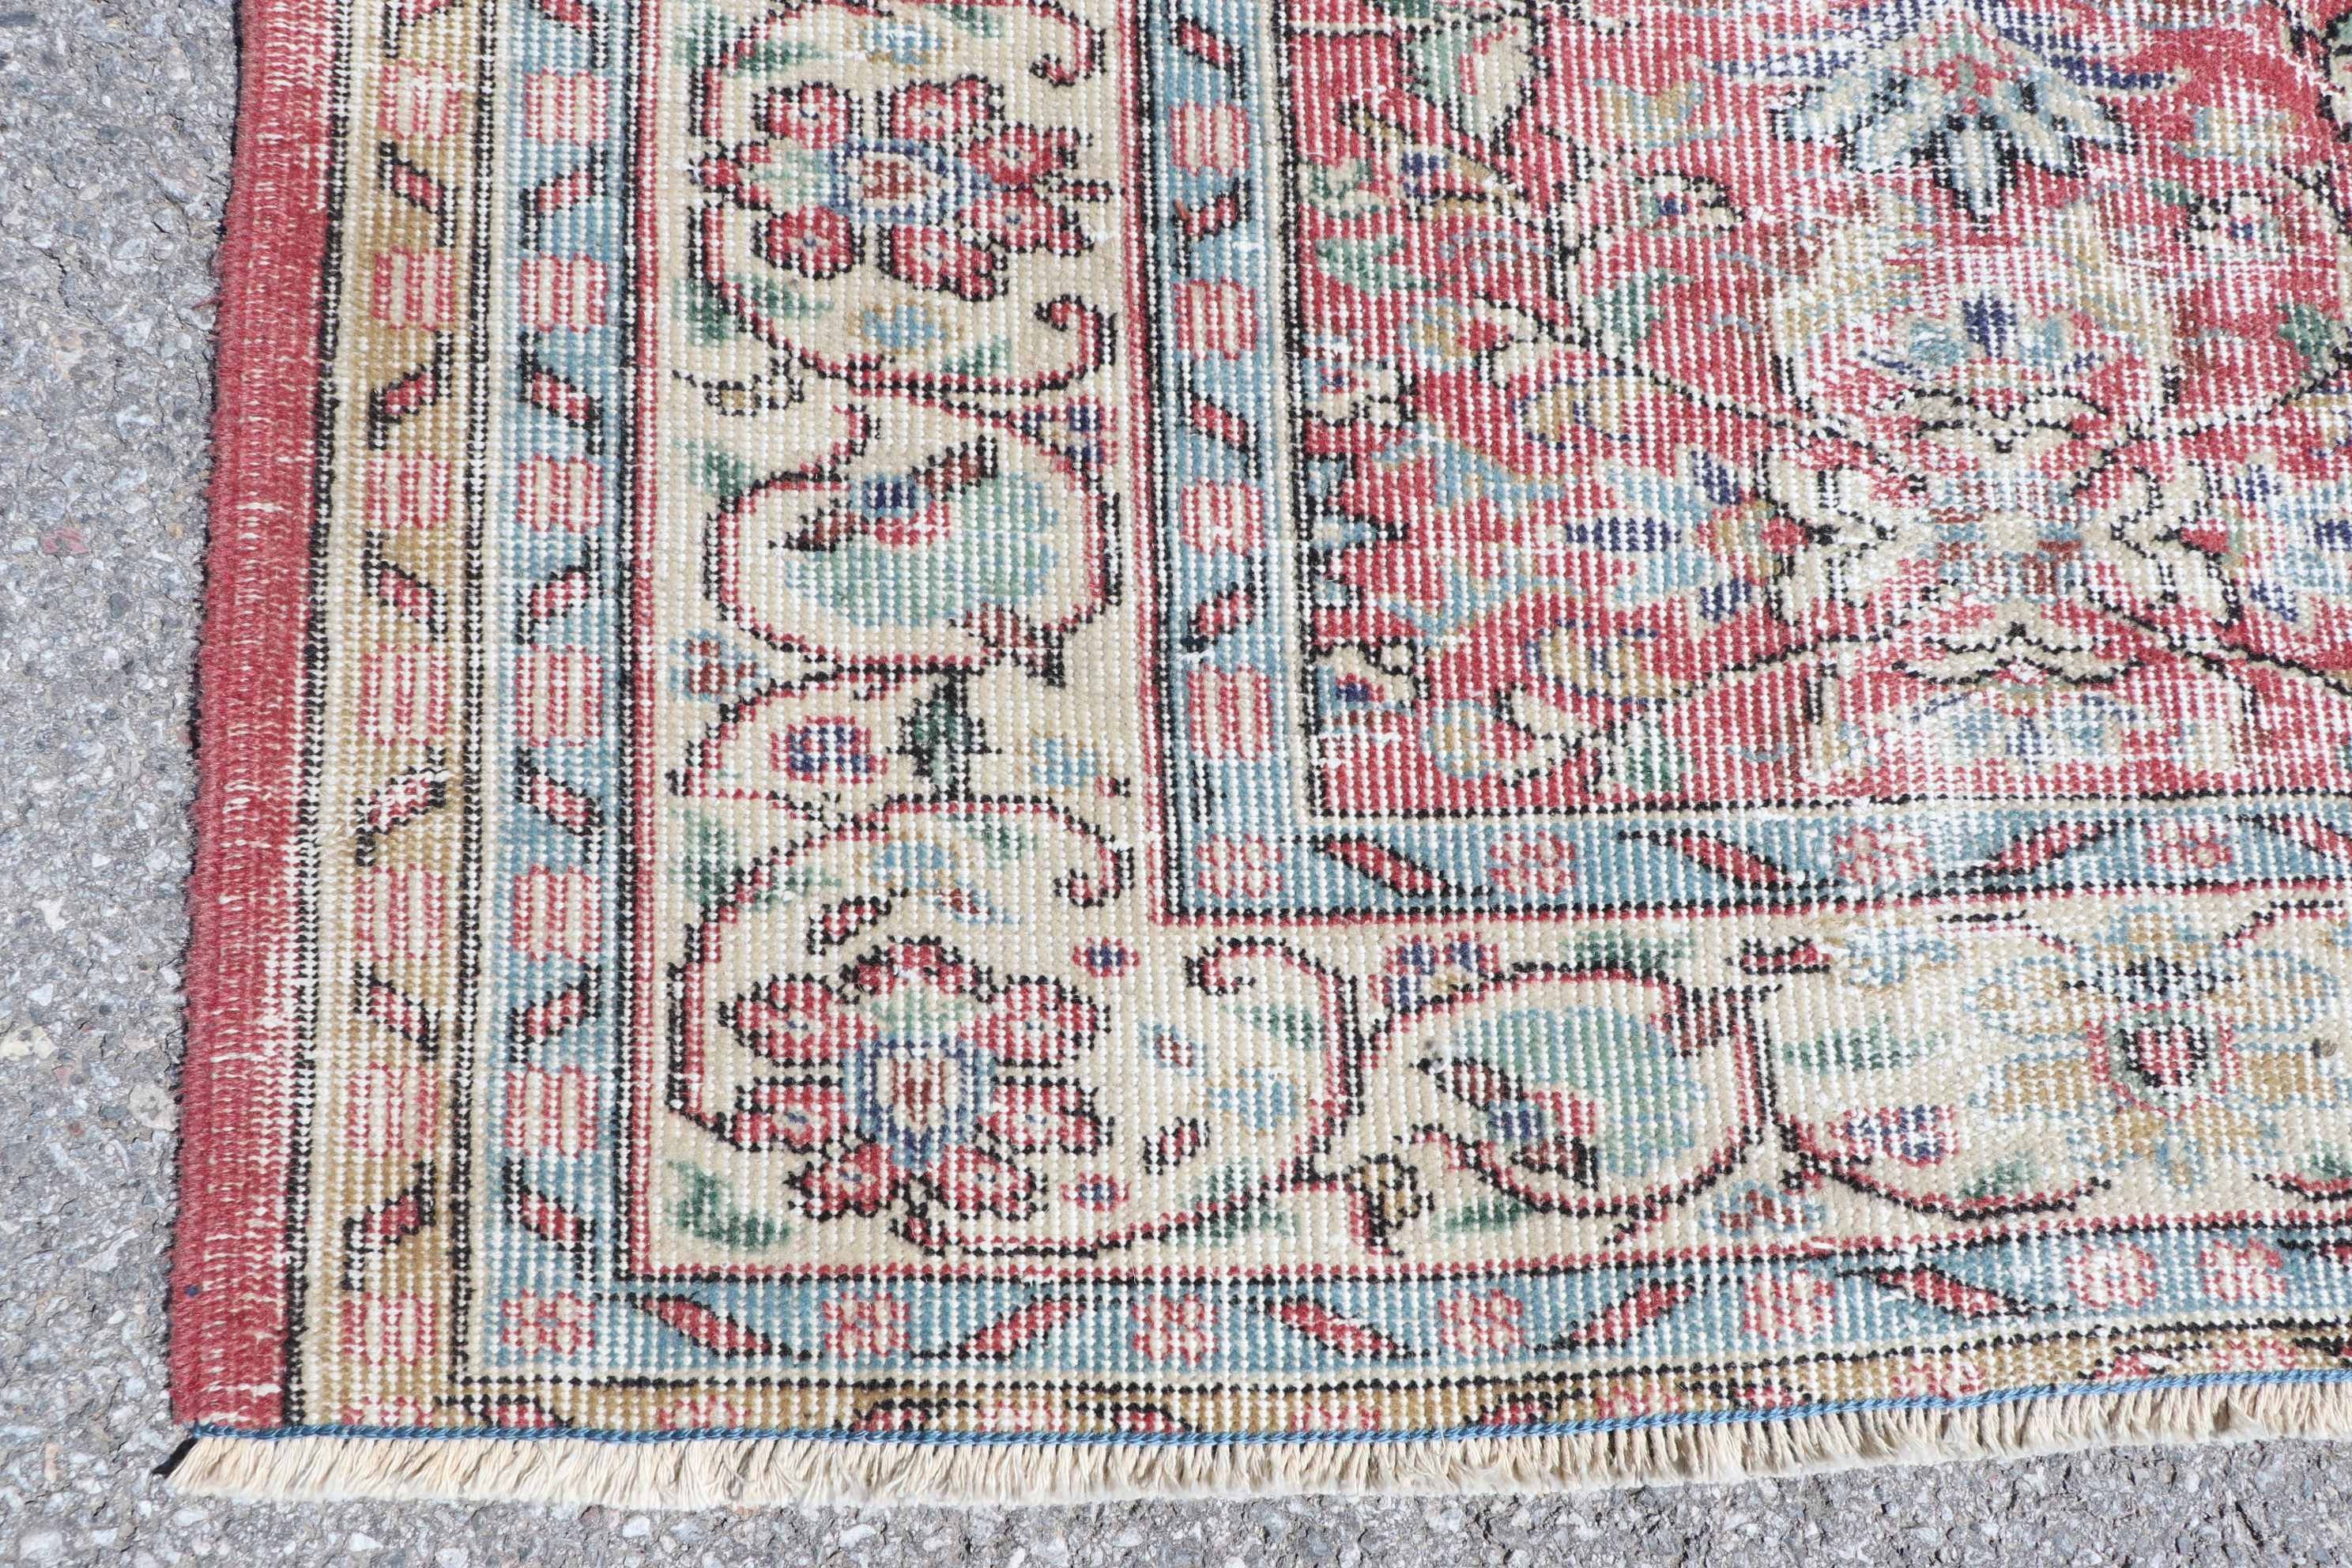 Pink Antique Rugs, Kitchen Rugs, Dining Room Rug, Cute Rugs, Bedroom Rugs, Rugs for Salon, 6.4x9.5 ft Large Rugs, Turkish Rug, Vintage Rugs